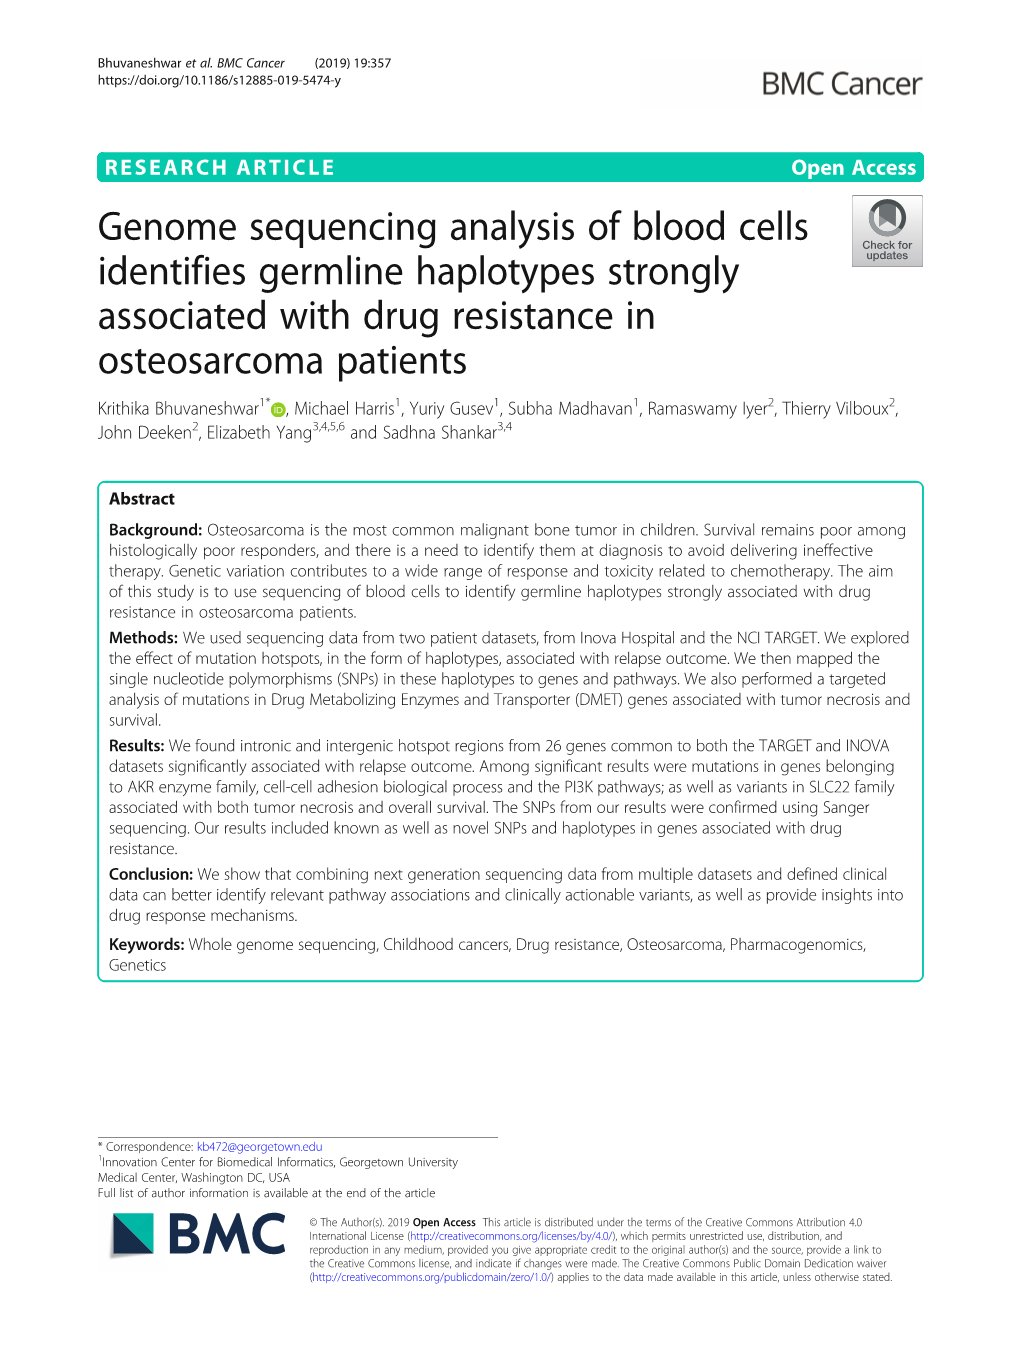 Genome Sequencing Analysis of Blood Cells Identifies Germline